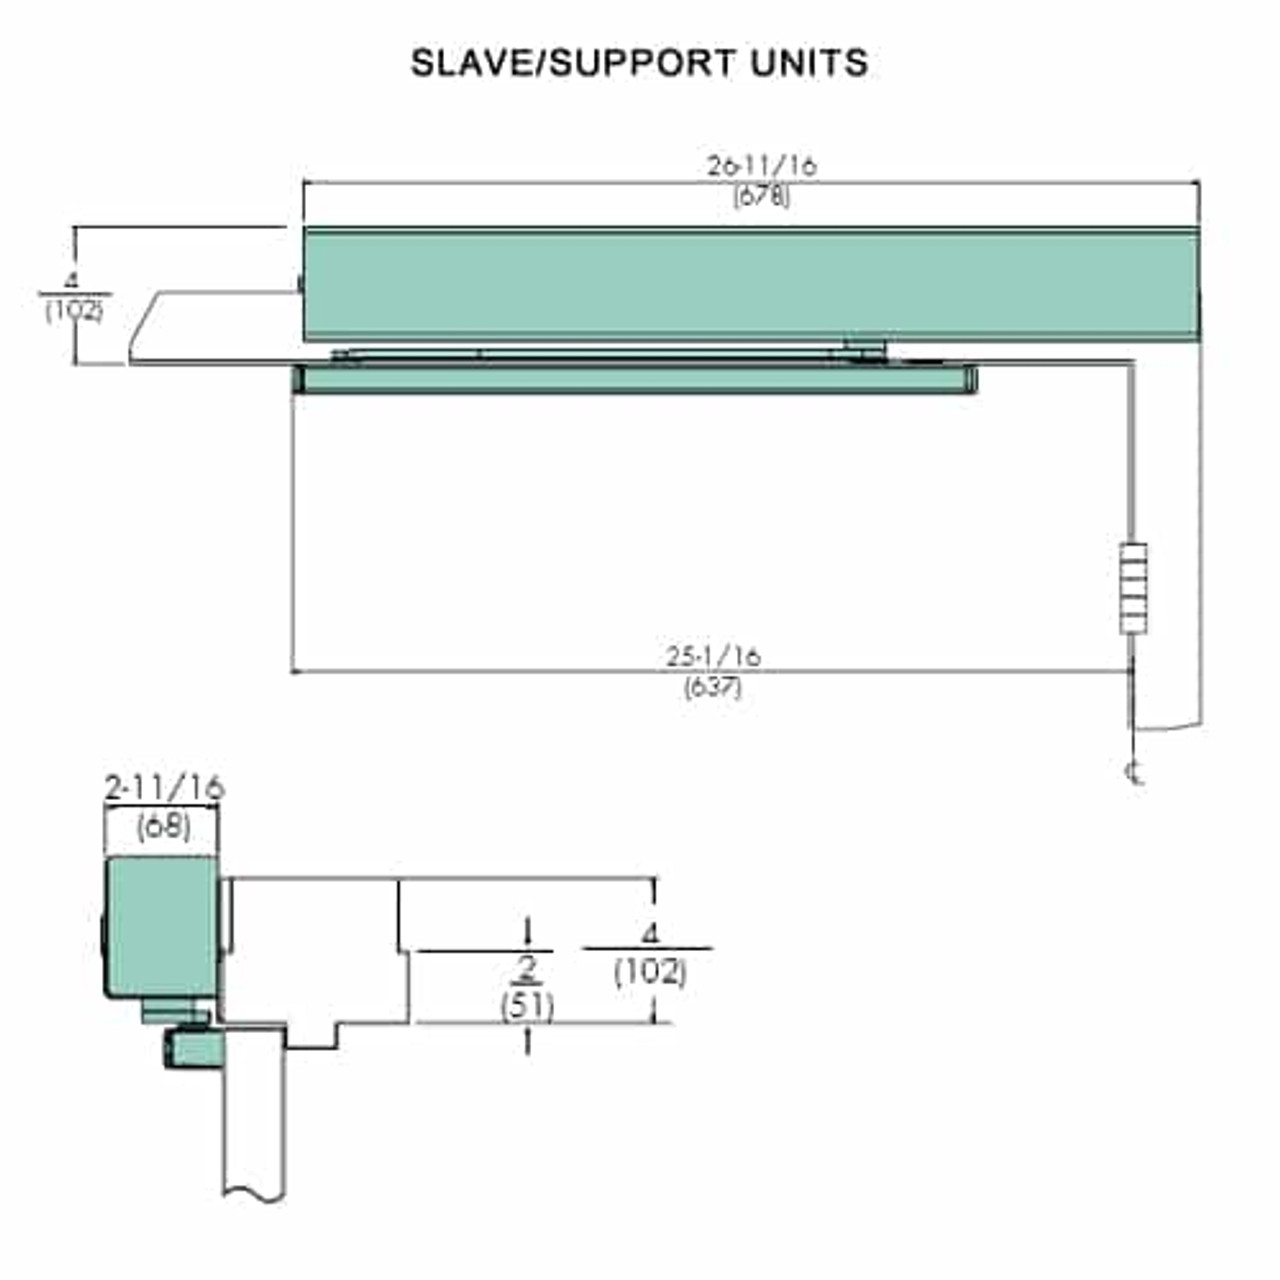 7253MPSO-LH-24VDC-691 Norton 7200 Series Electromechanical Closer and Holder with Double Egress Arm Slide Track Slave/Support Unit in Dull Bronze Finish